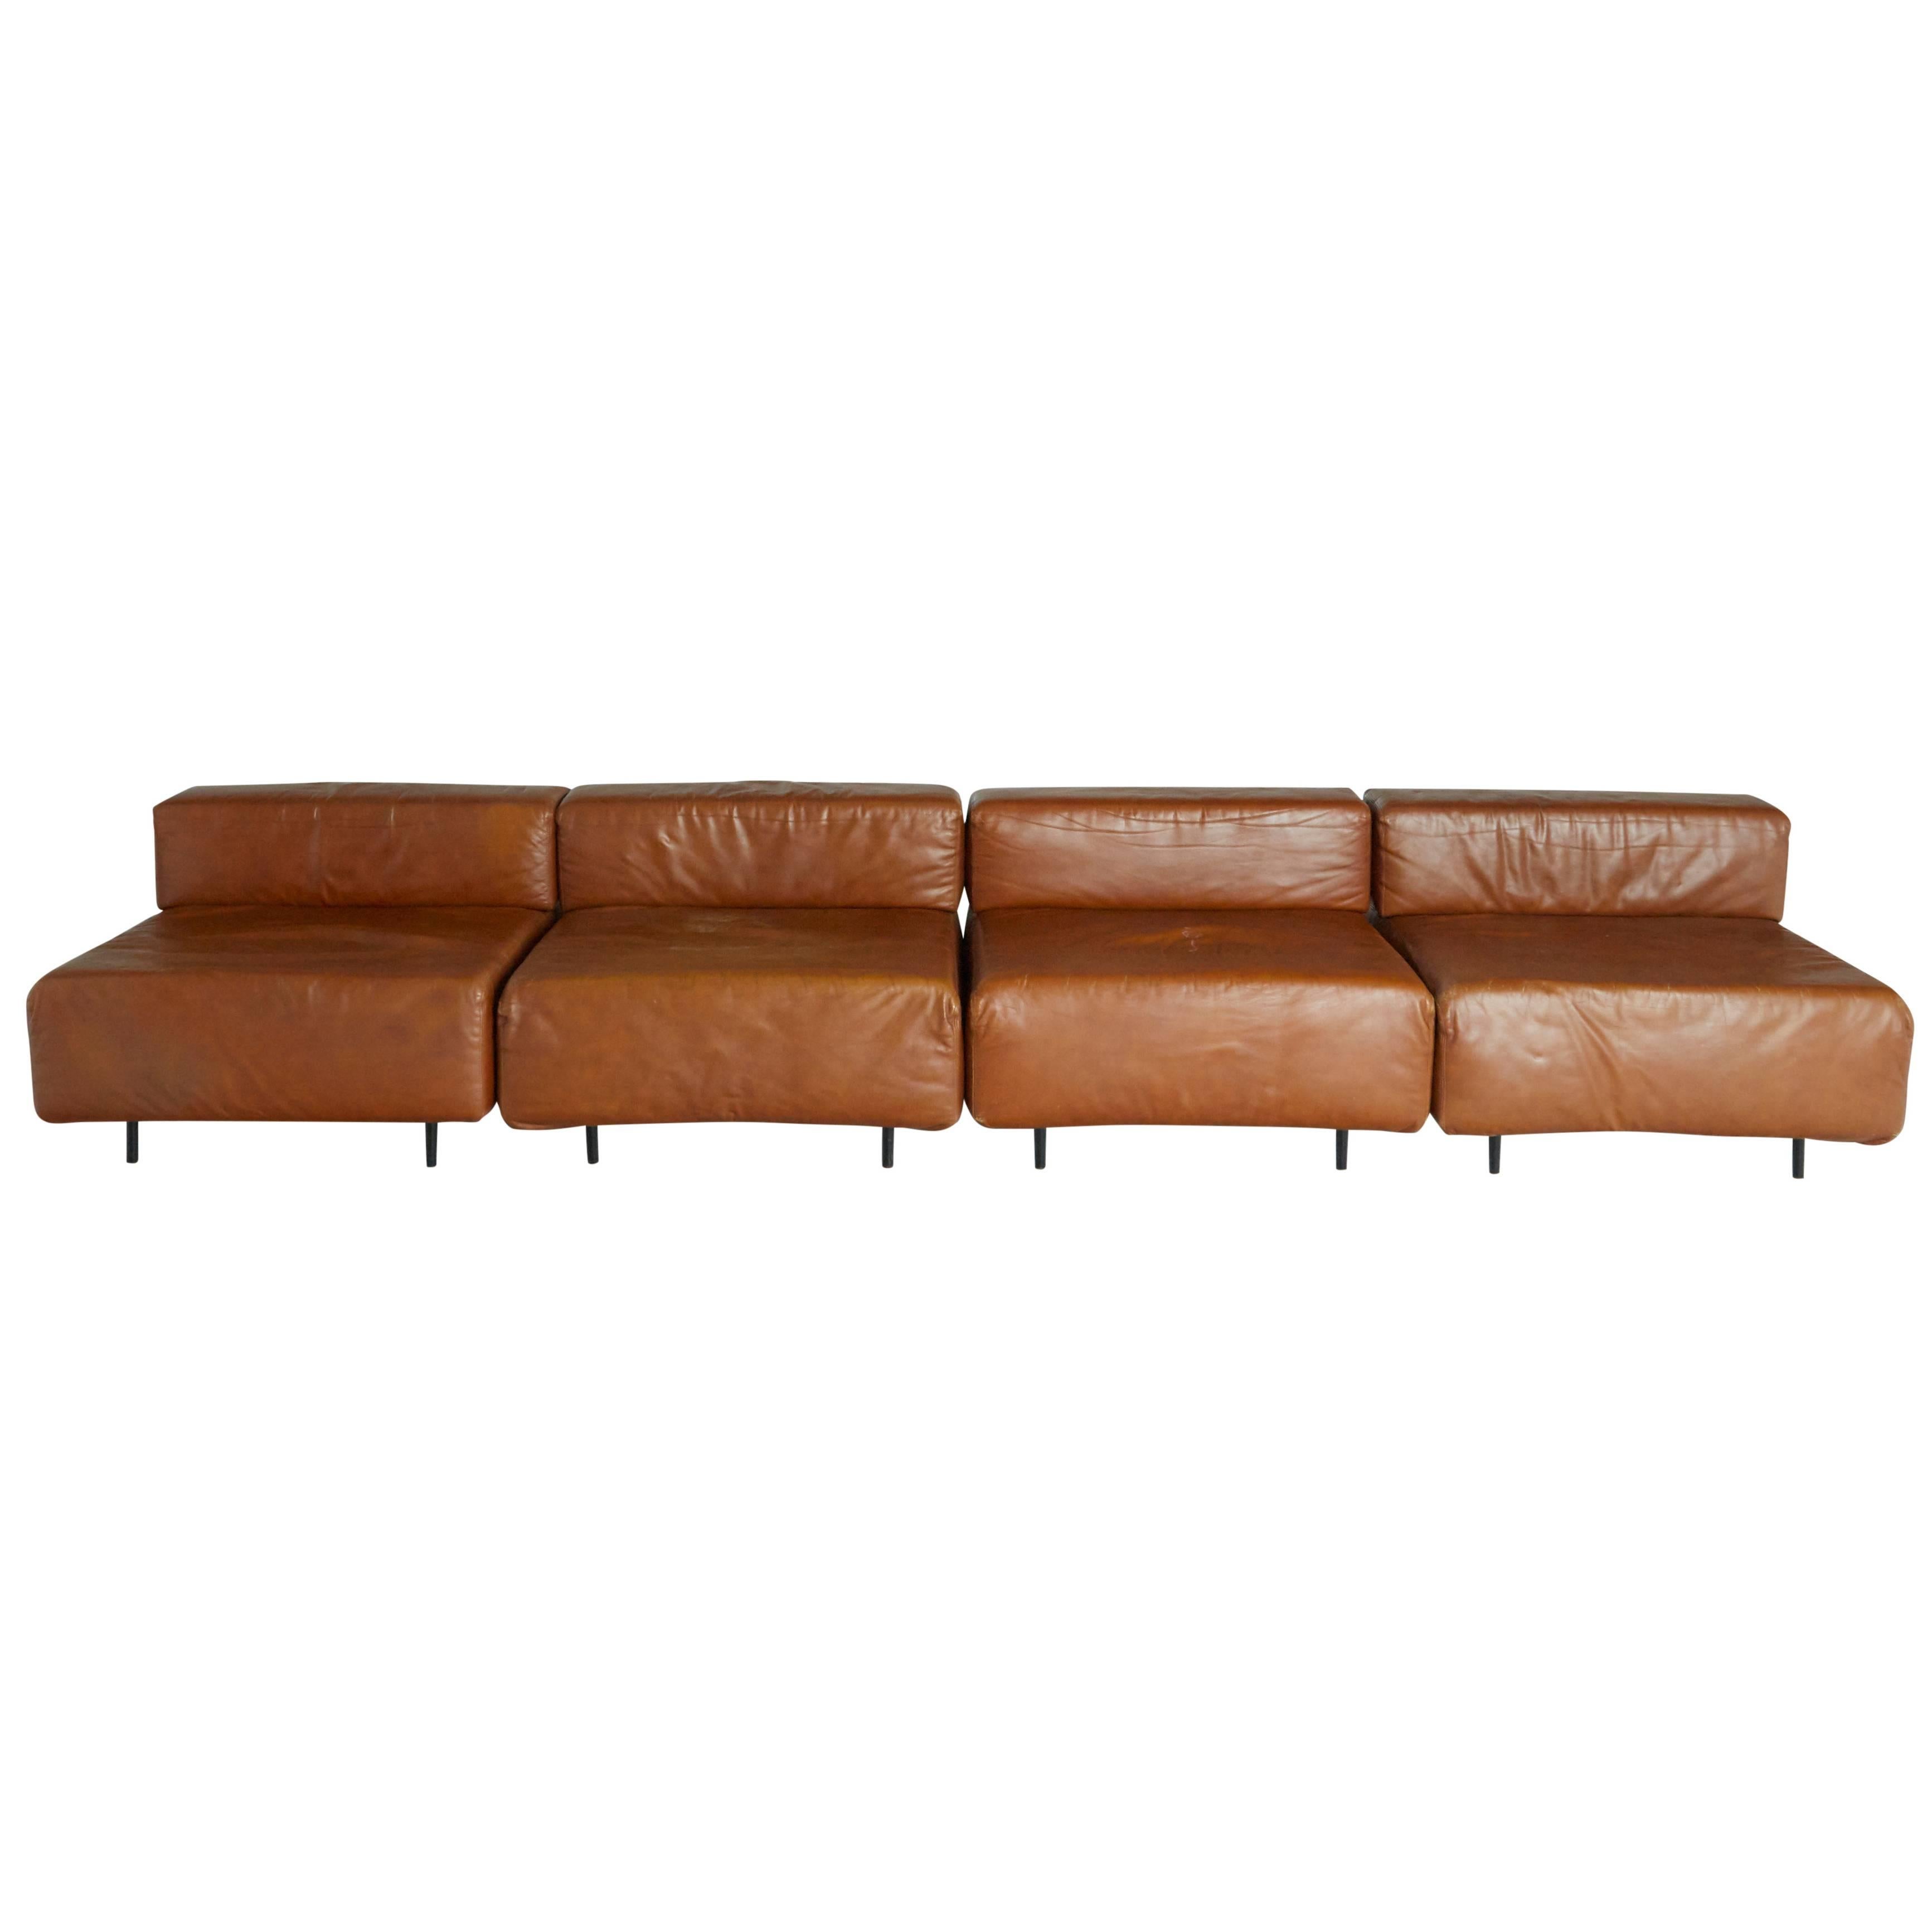 Harvey Probber 'Cubo' Leather Sectional Sofa or Lounge Chairs, Set of 4 (Four)